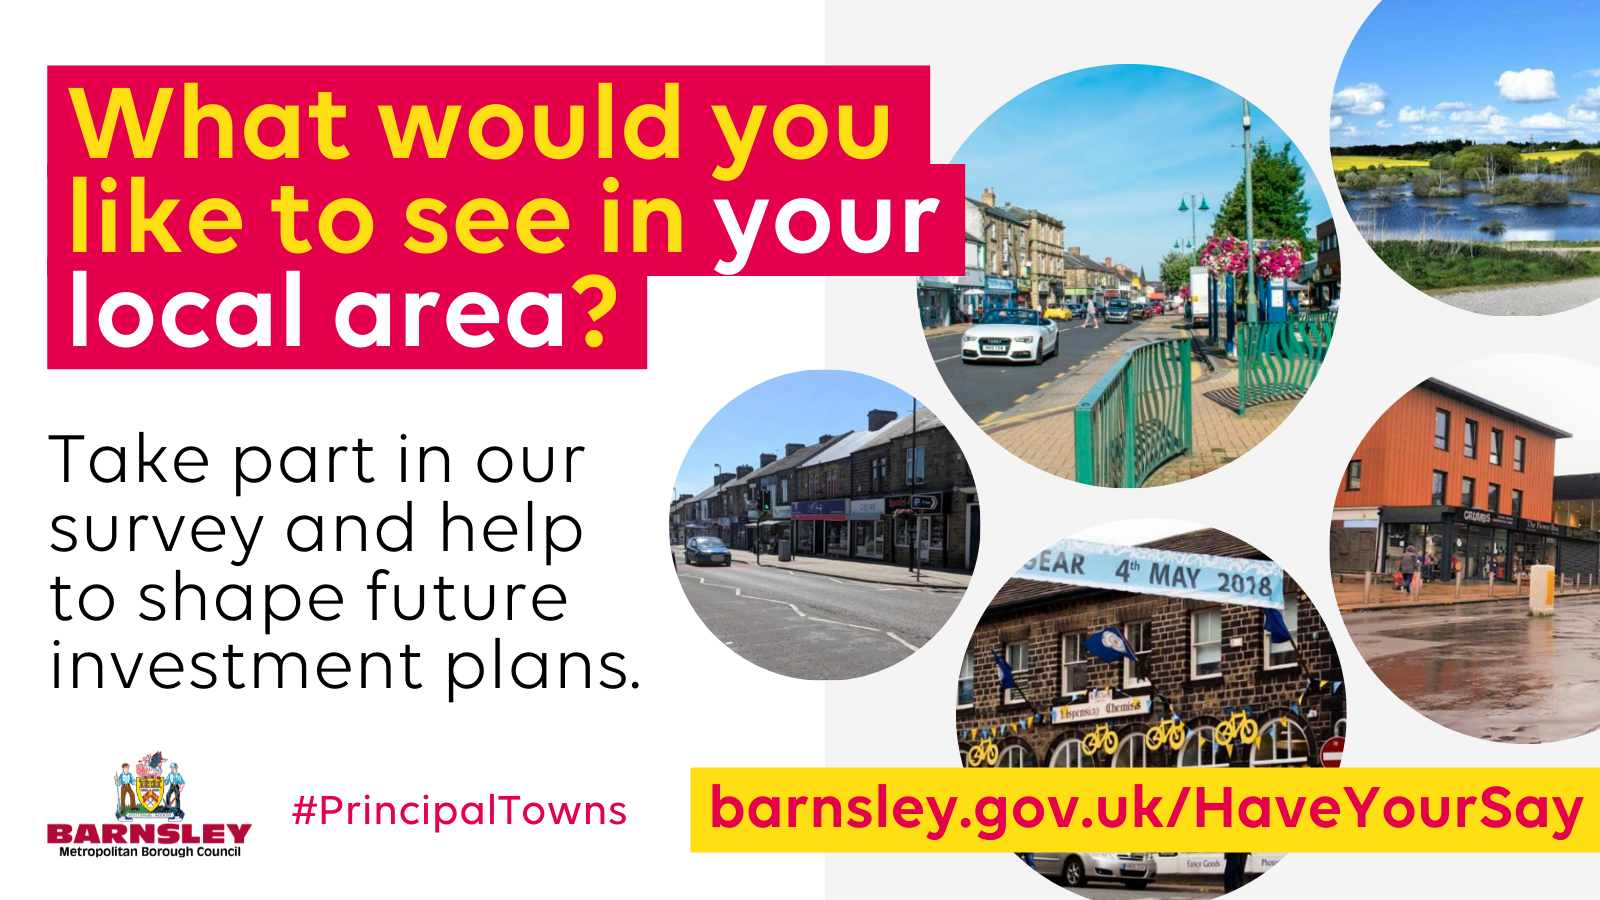 What would you like to see in your local area? Take part in our survey and help us to shape future investment plans.